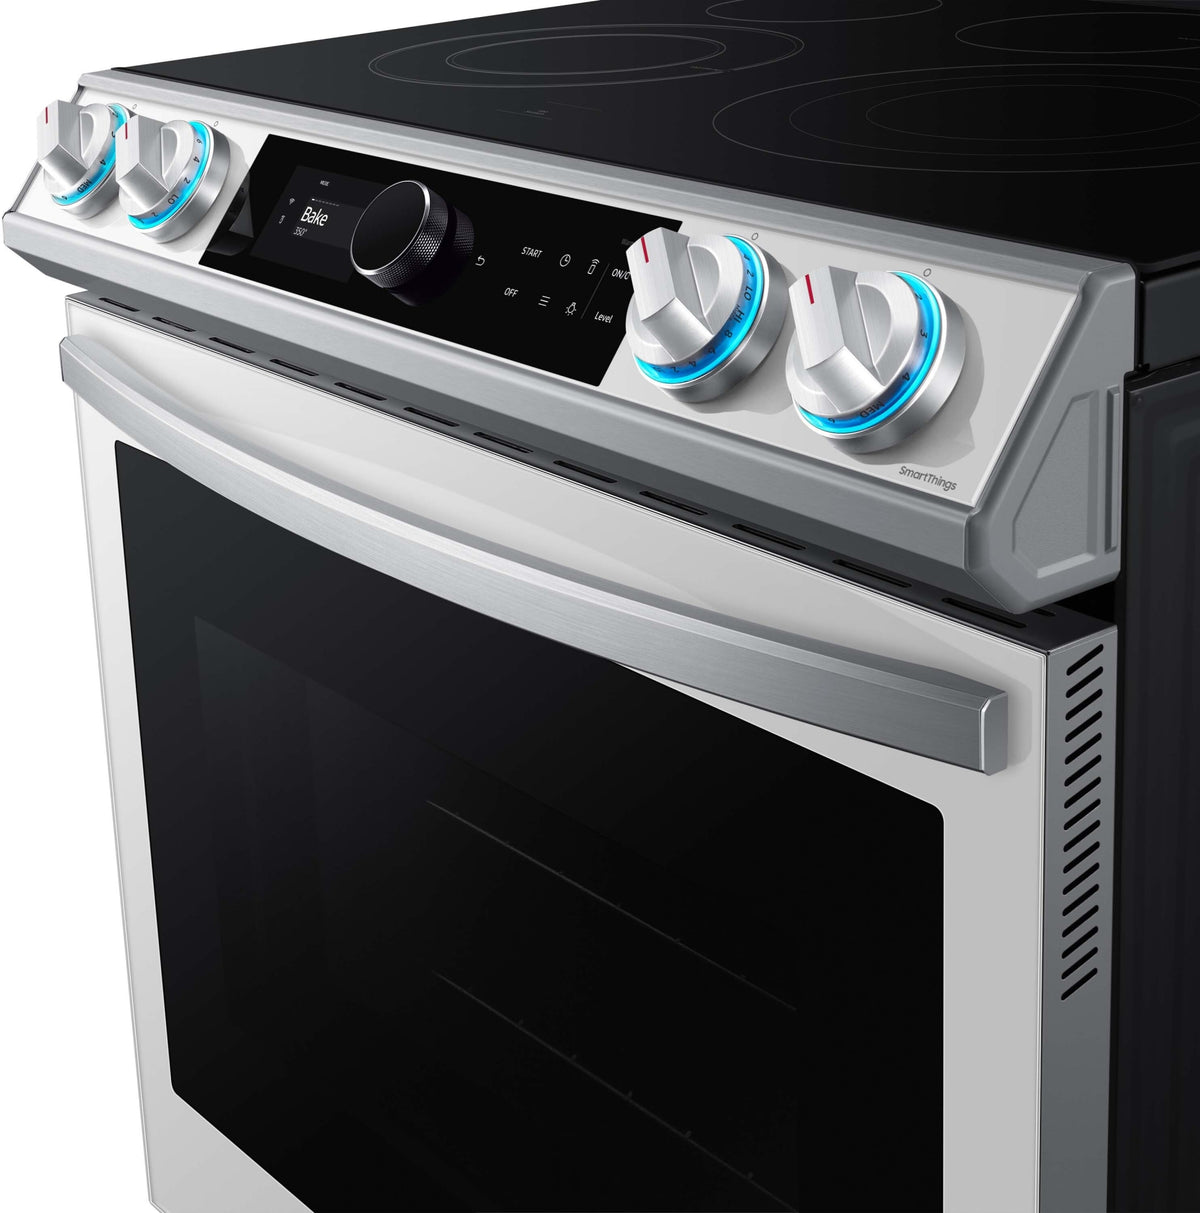 SAMSUNG NE63BB871112/AA Bespoke Slide-in Electric Range 6.3 cu. ft. with Air Fry in White Glass